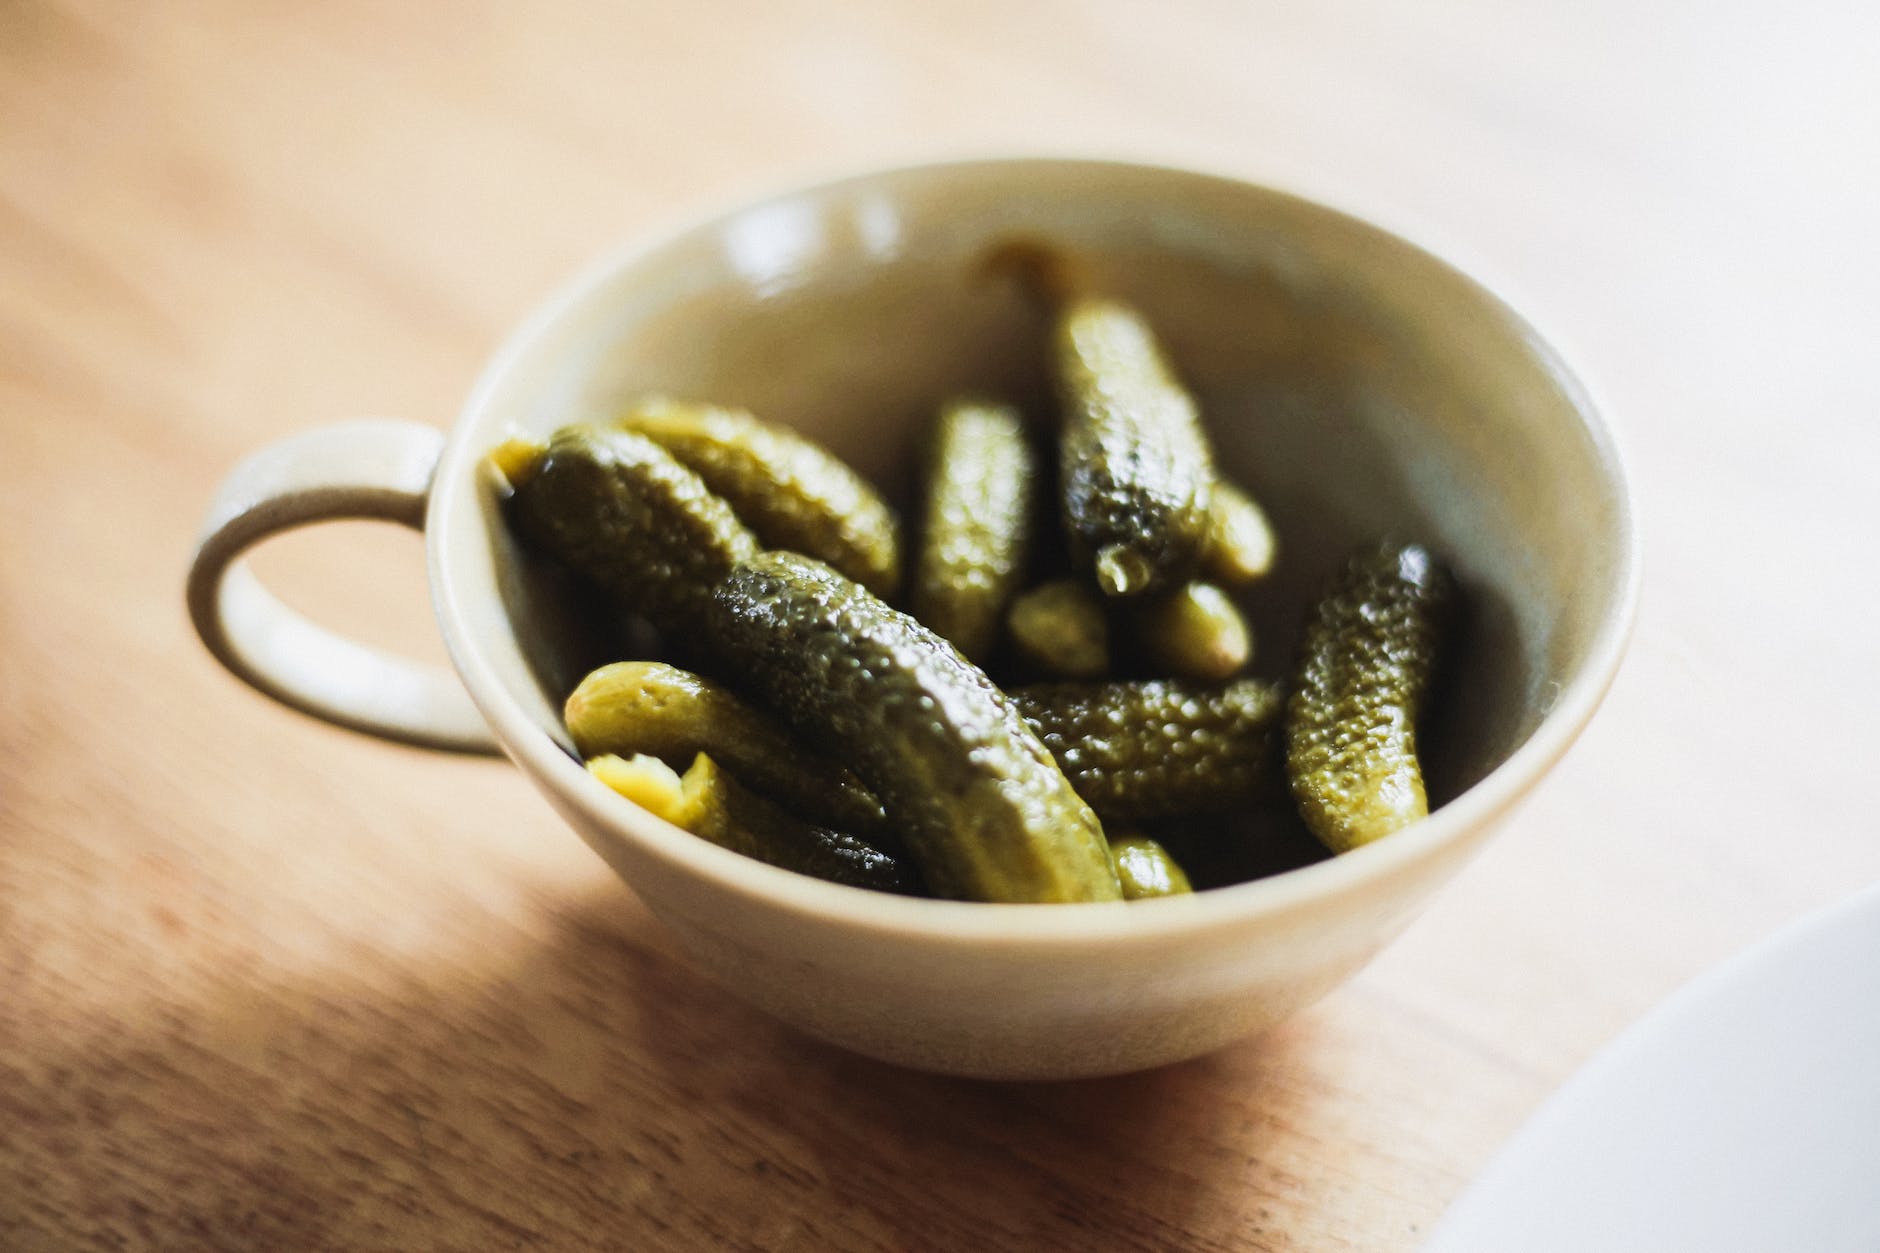 pickles on the bowl